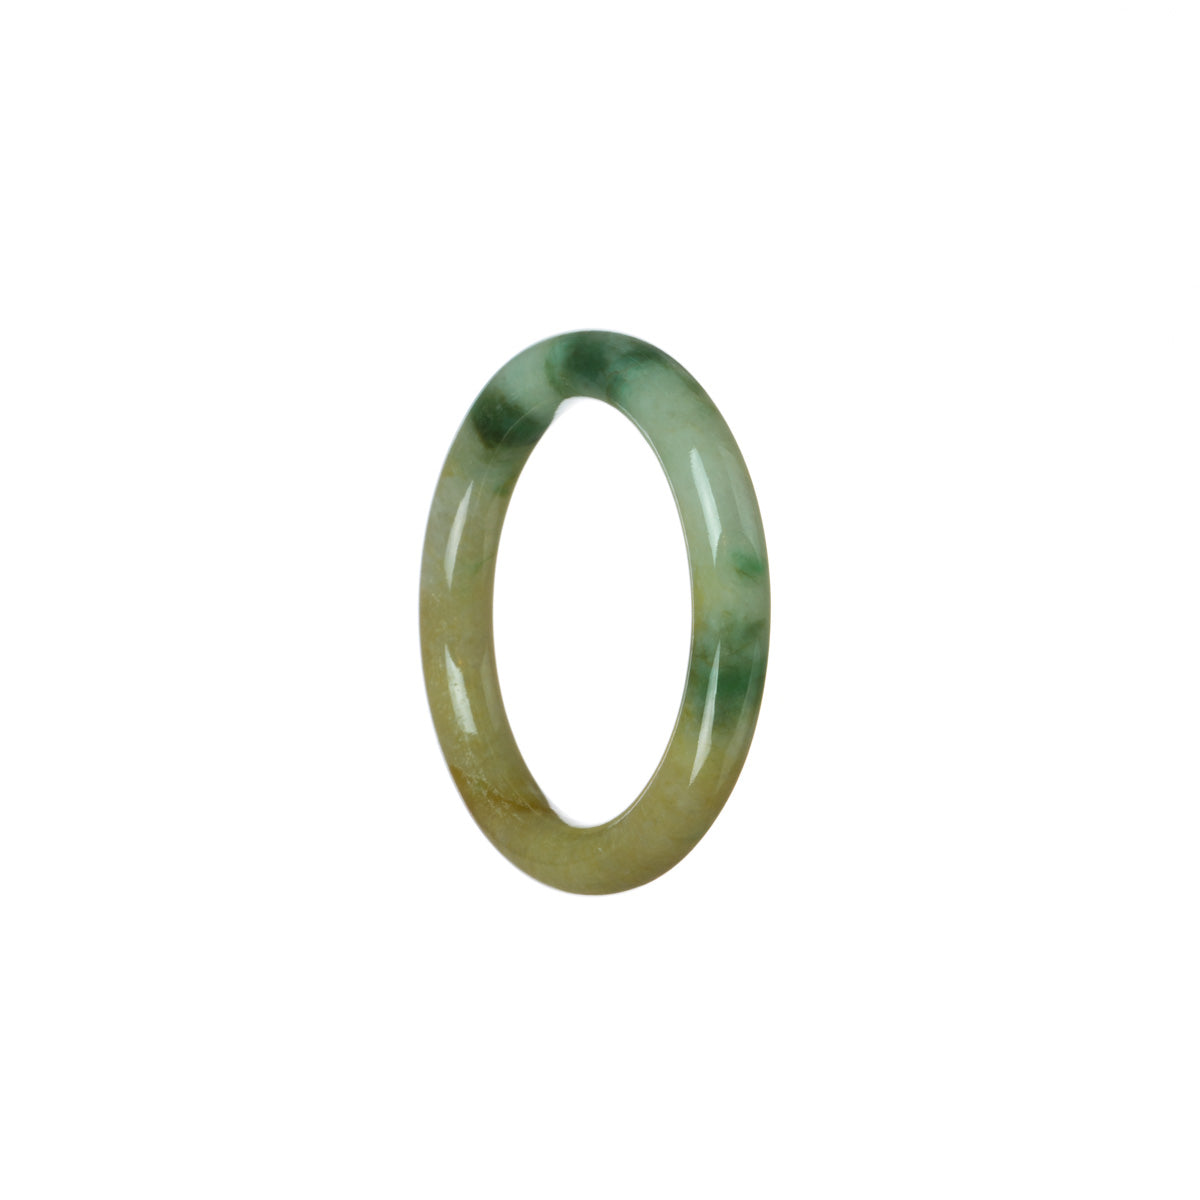 A close-up photo of a small jade bangle bracelet, featuring a smooth and polished brownish white jadeite stone with hints of emerald green. The bracelet is designed for children and is certified as Type A jade. The brand name "MAYS" is also visible.